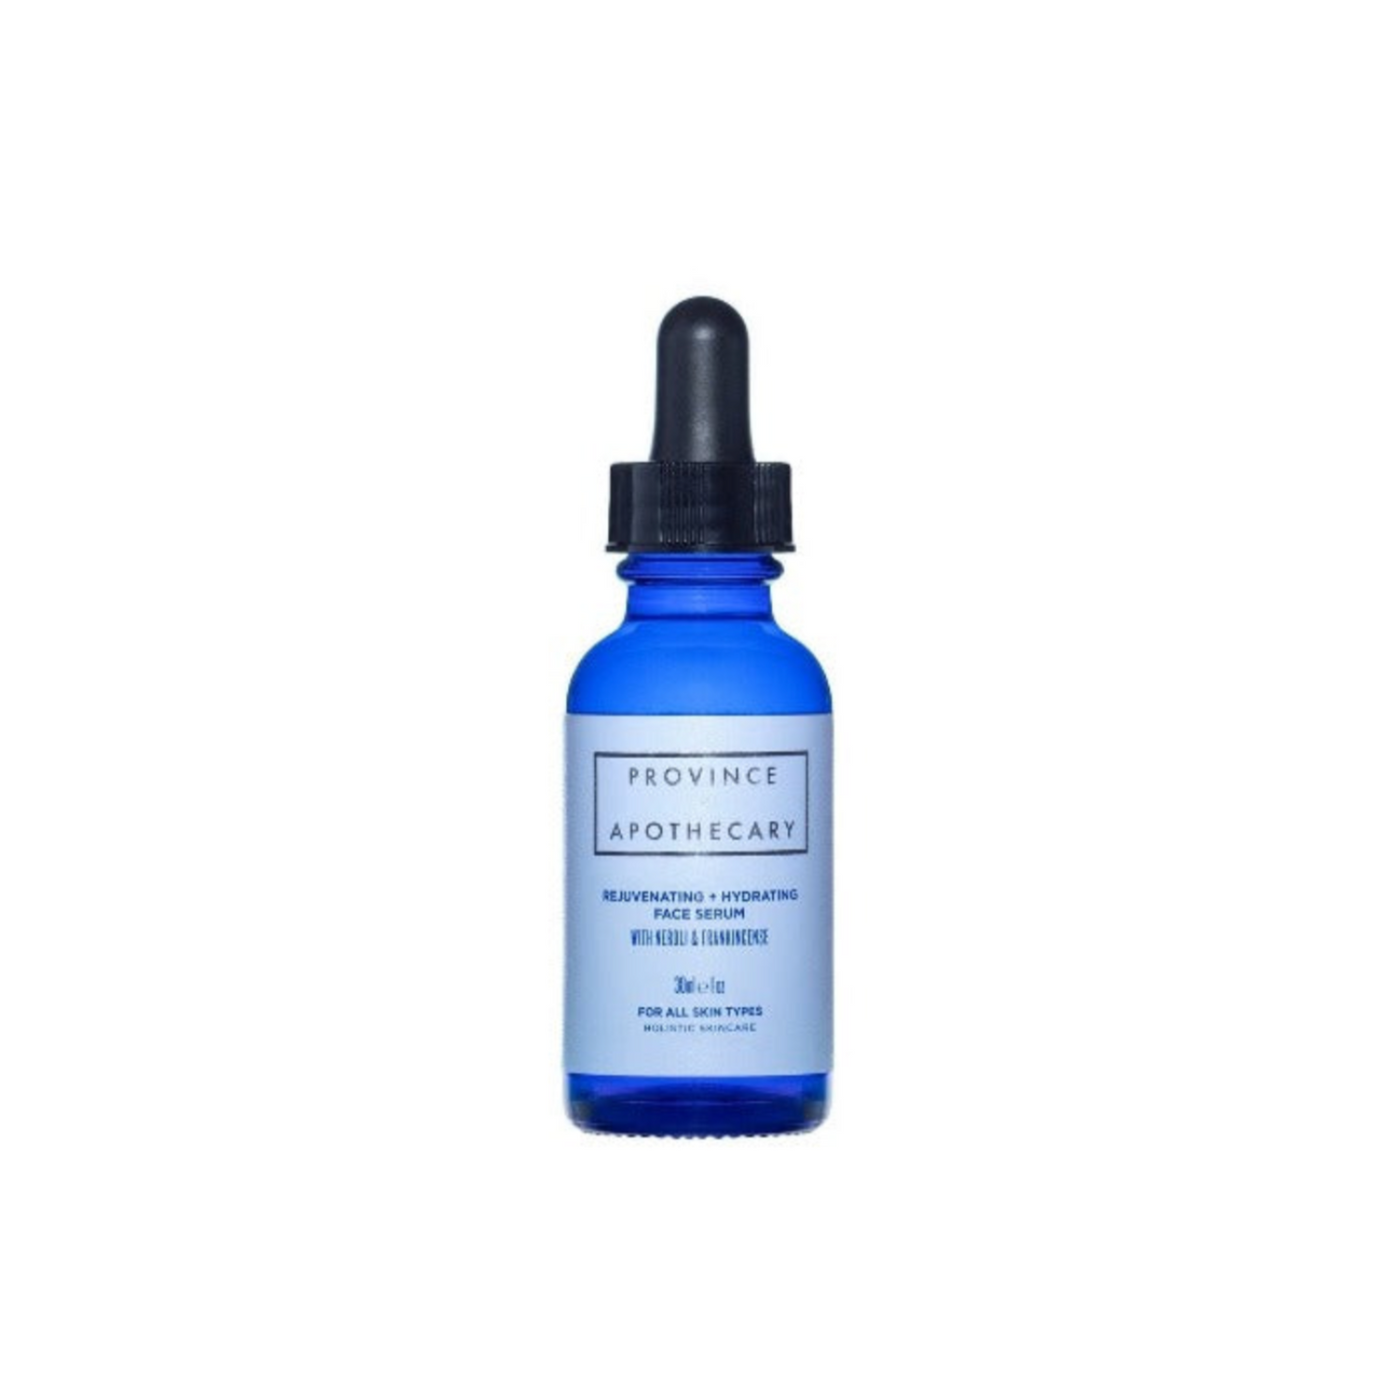  Province Apothecary Rejuvenating and Hydrating Facial Serum